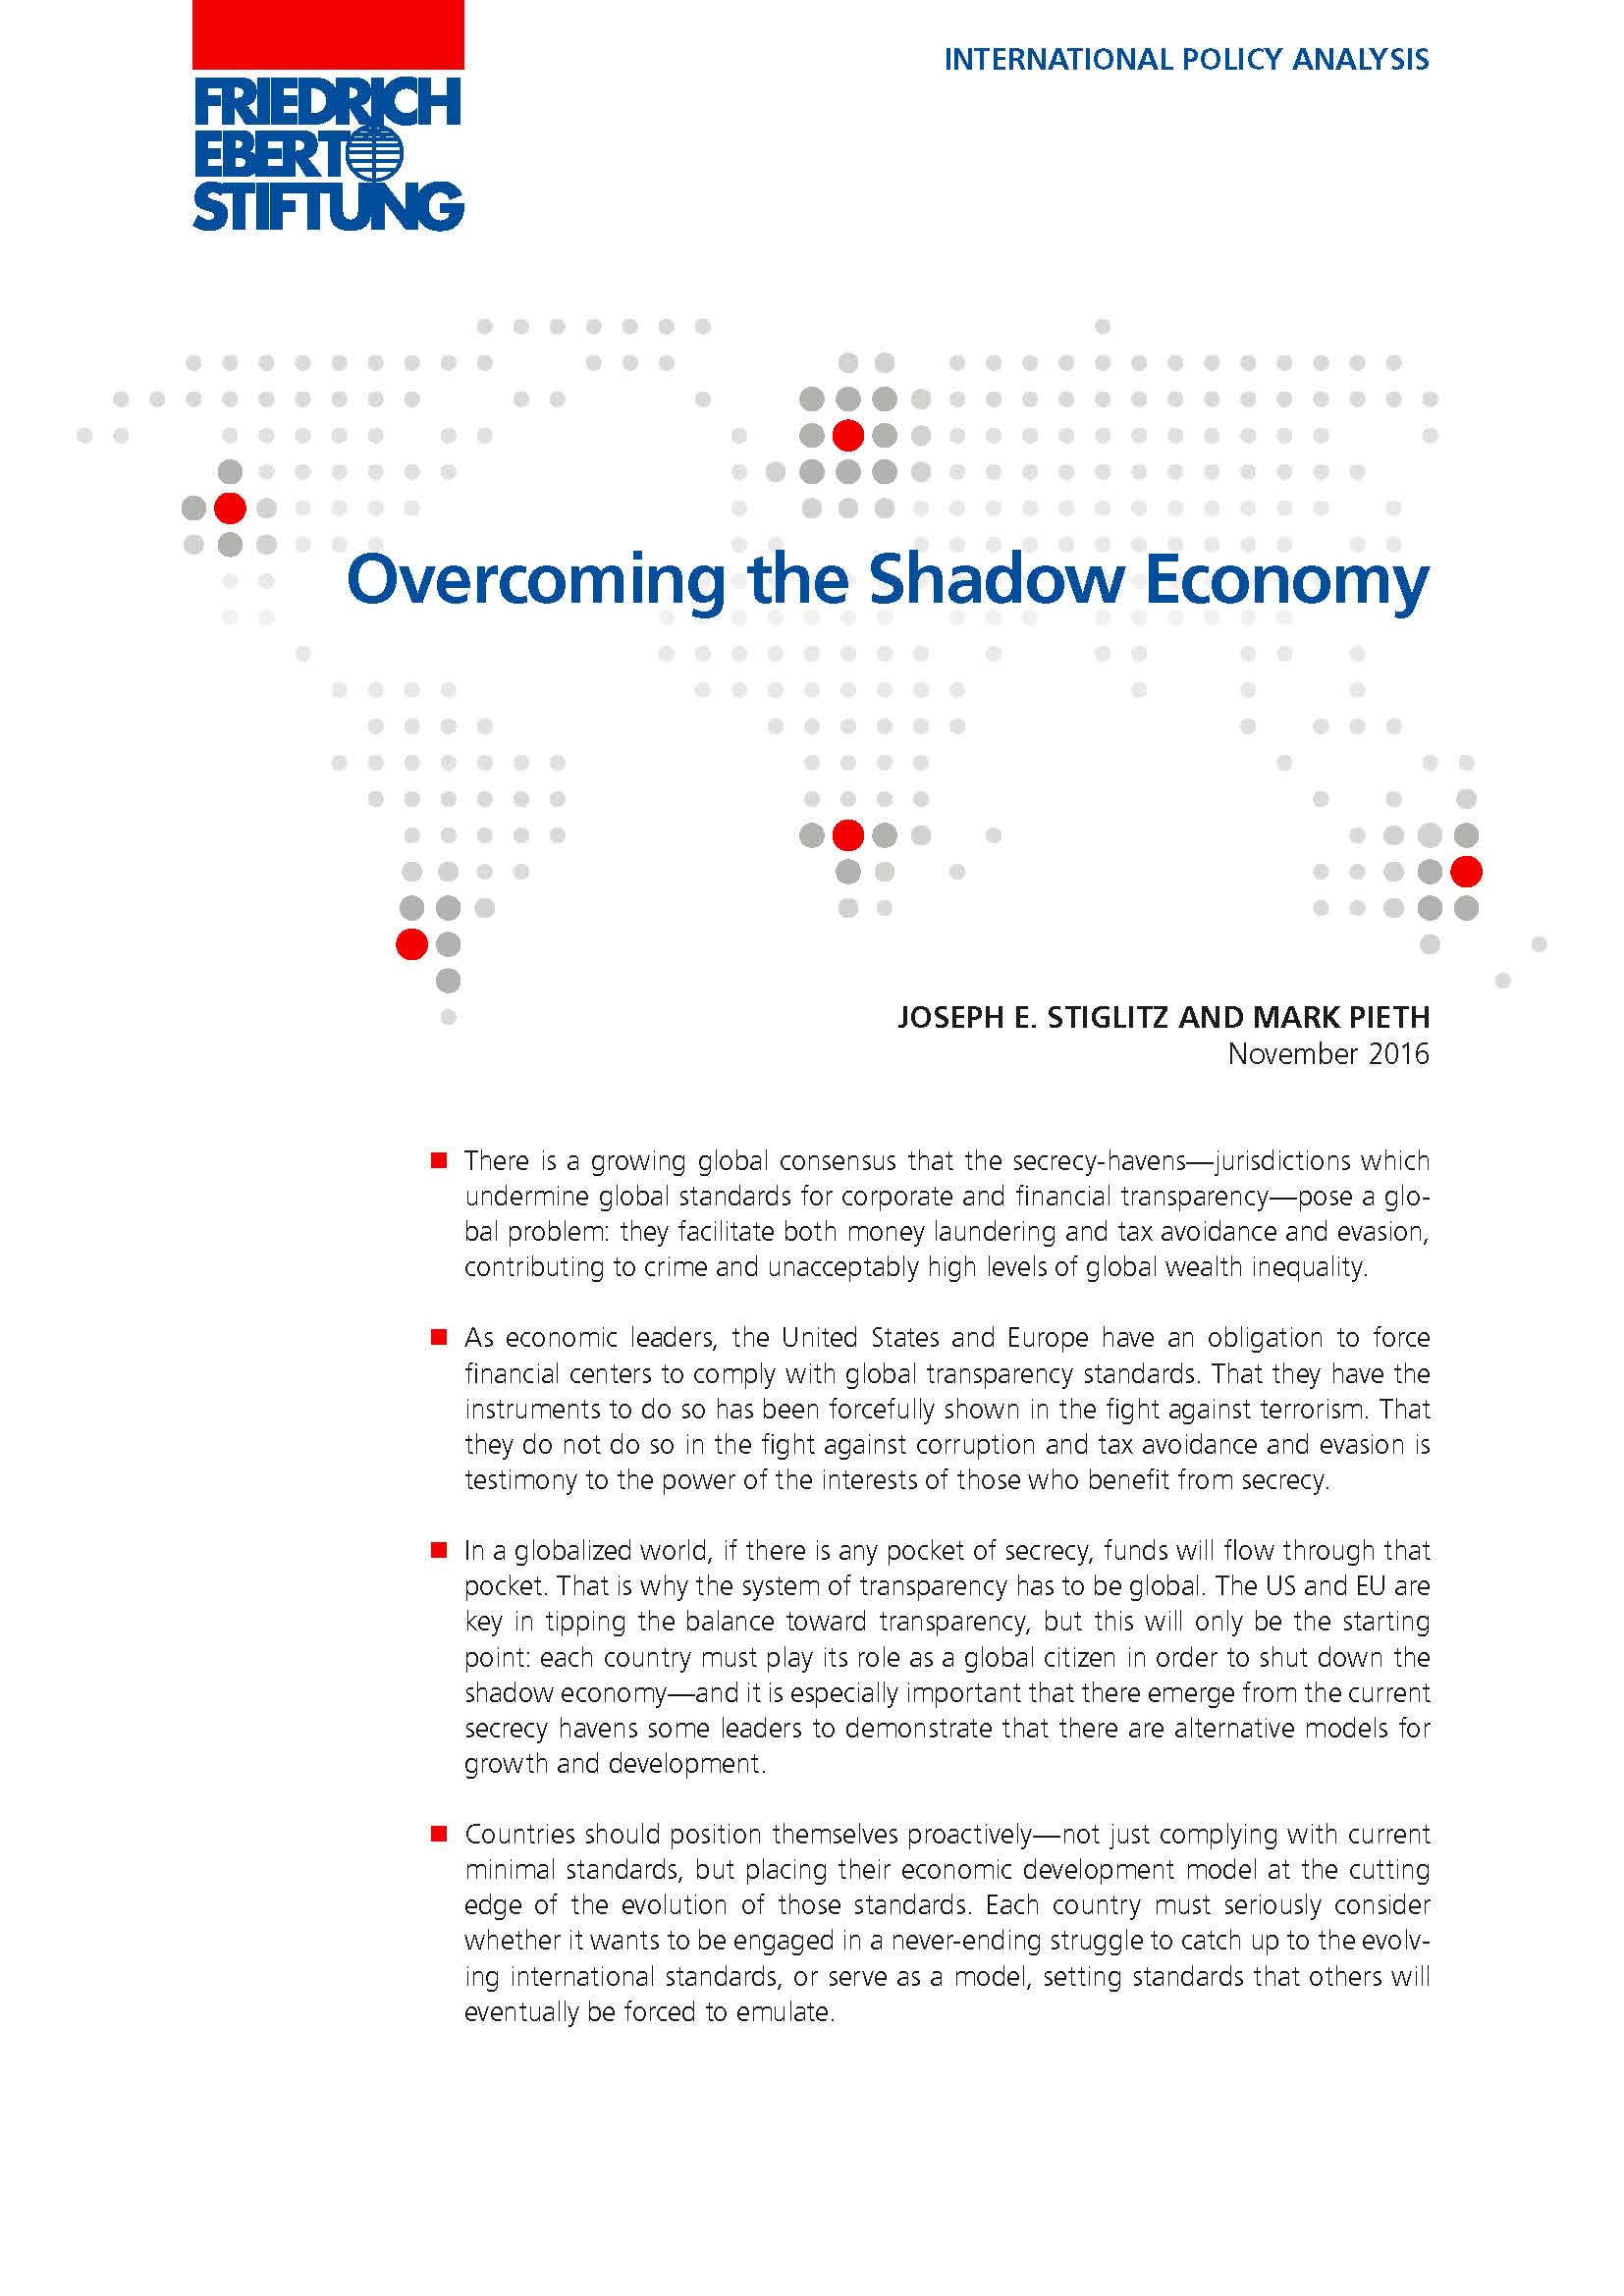 First page of Overcoming the Shadow Economy report